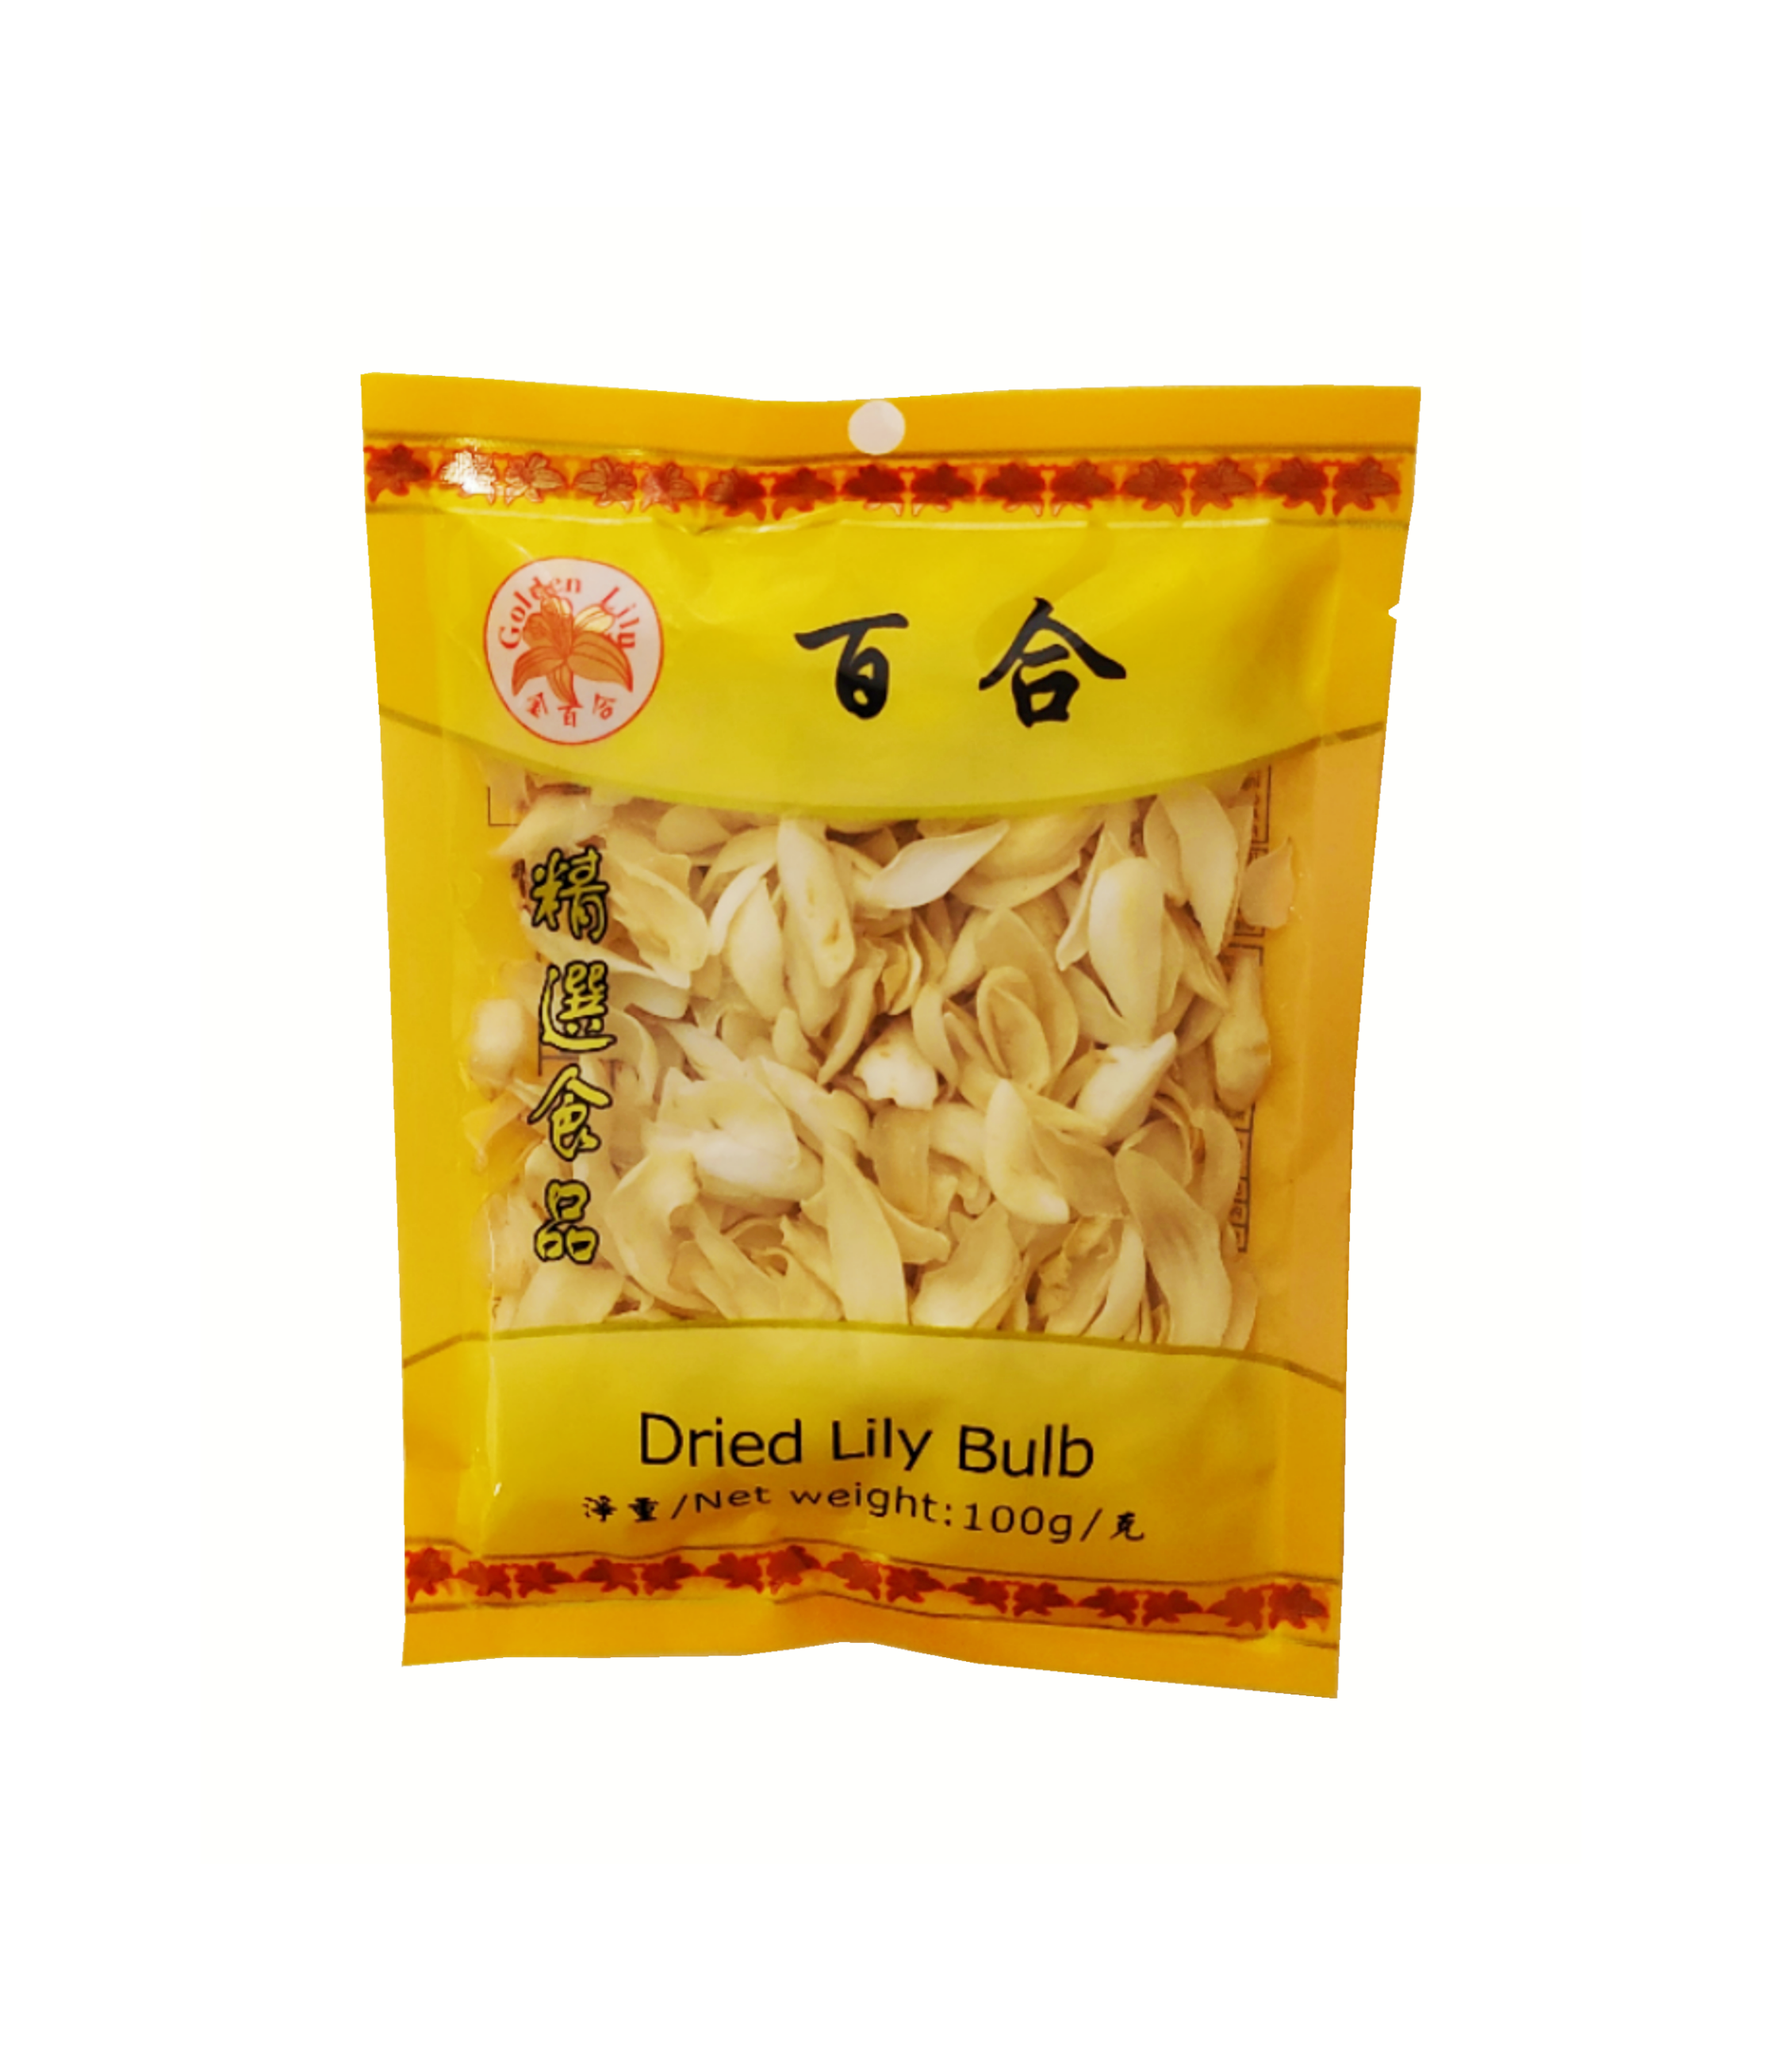 Dried Lily Bulb (Pak Hop) 100g Golden Lily China